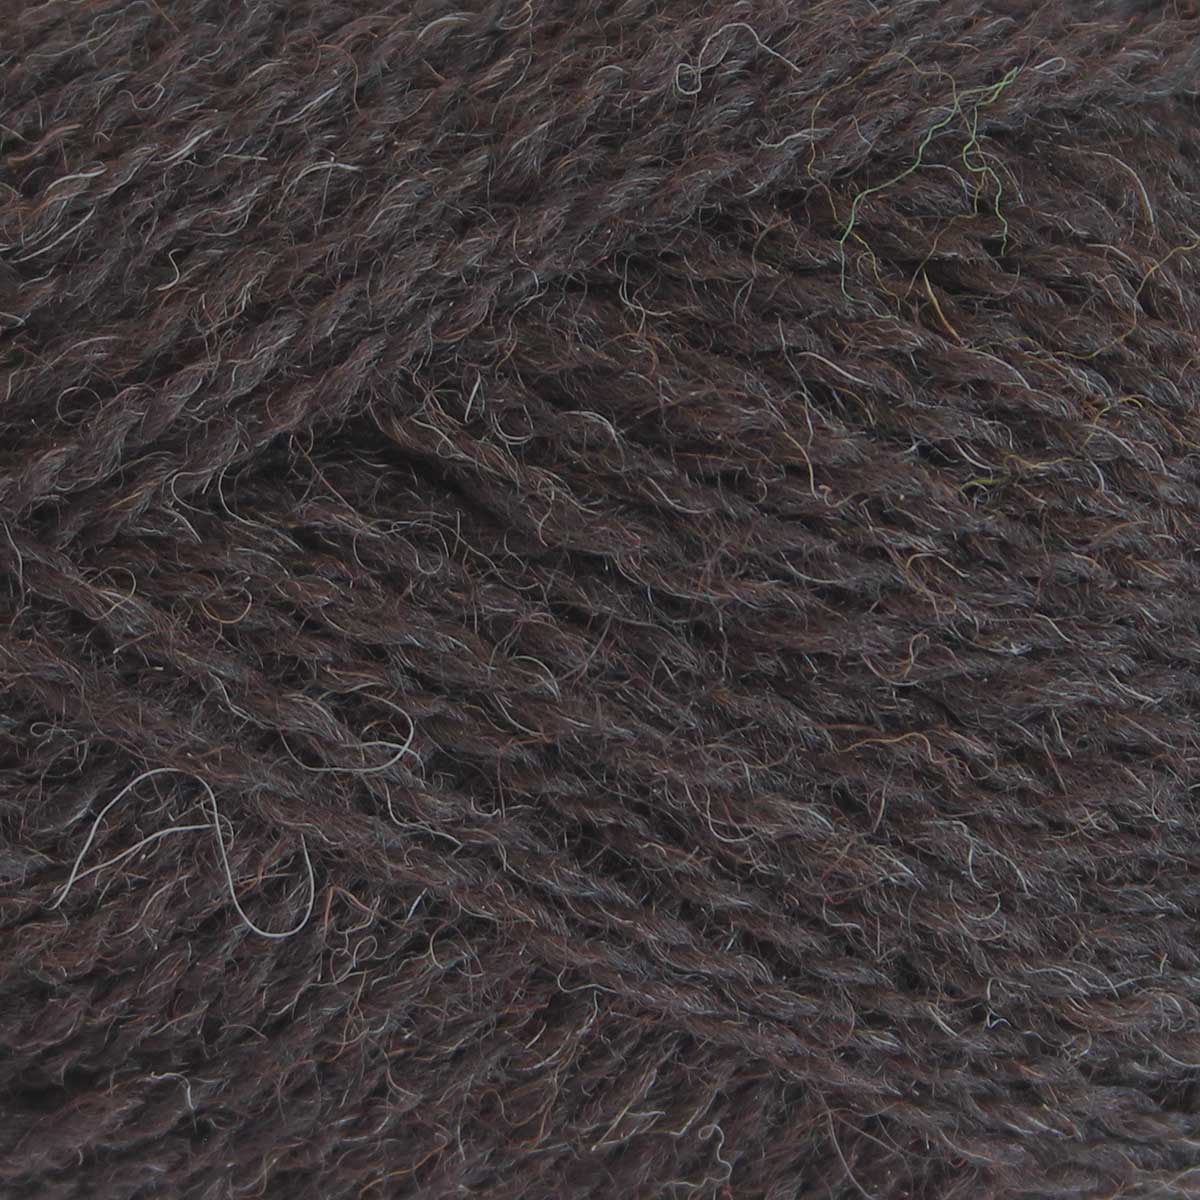 Pip Naturals (Undyed) 4ply Pack Of 10: 100% British Hand Knitting Wool 25g Ball